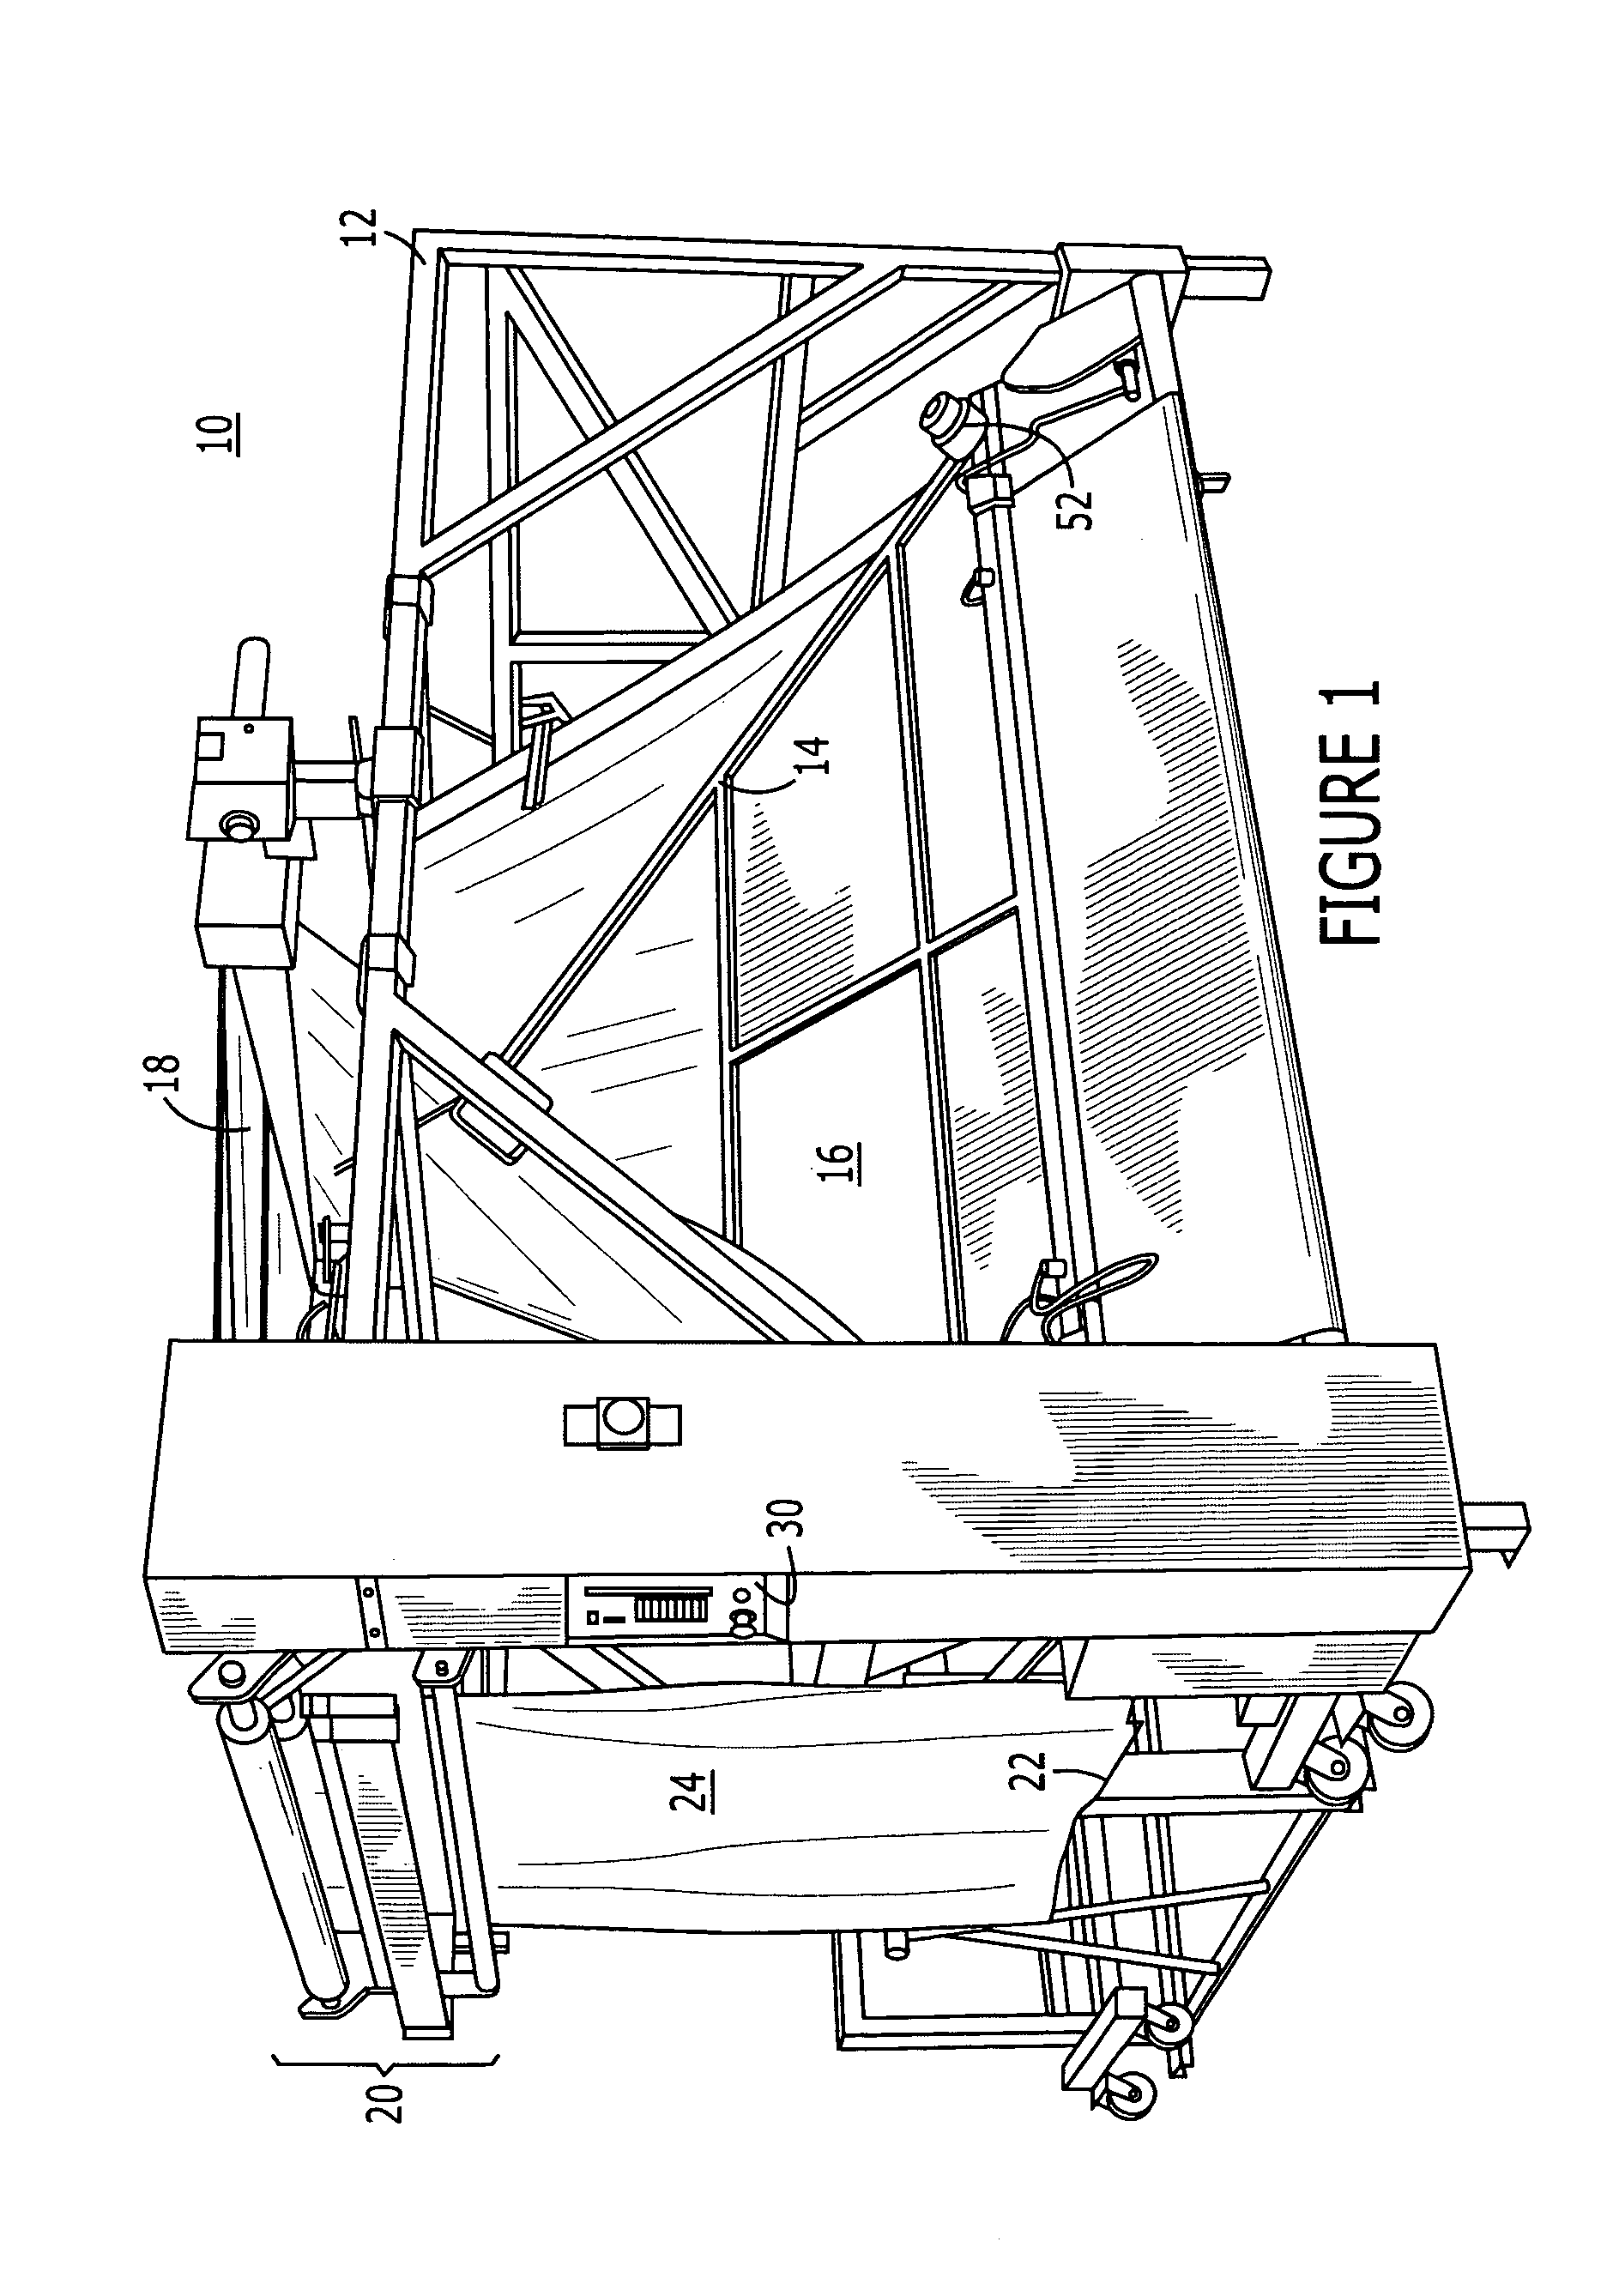 Queue-based bag forming system and method